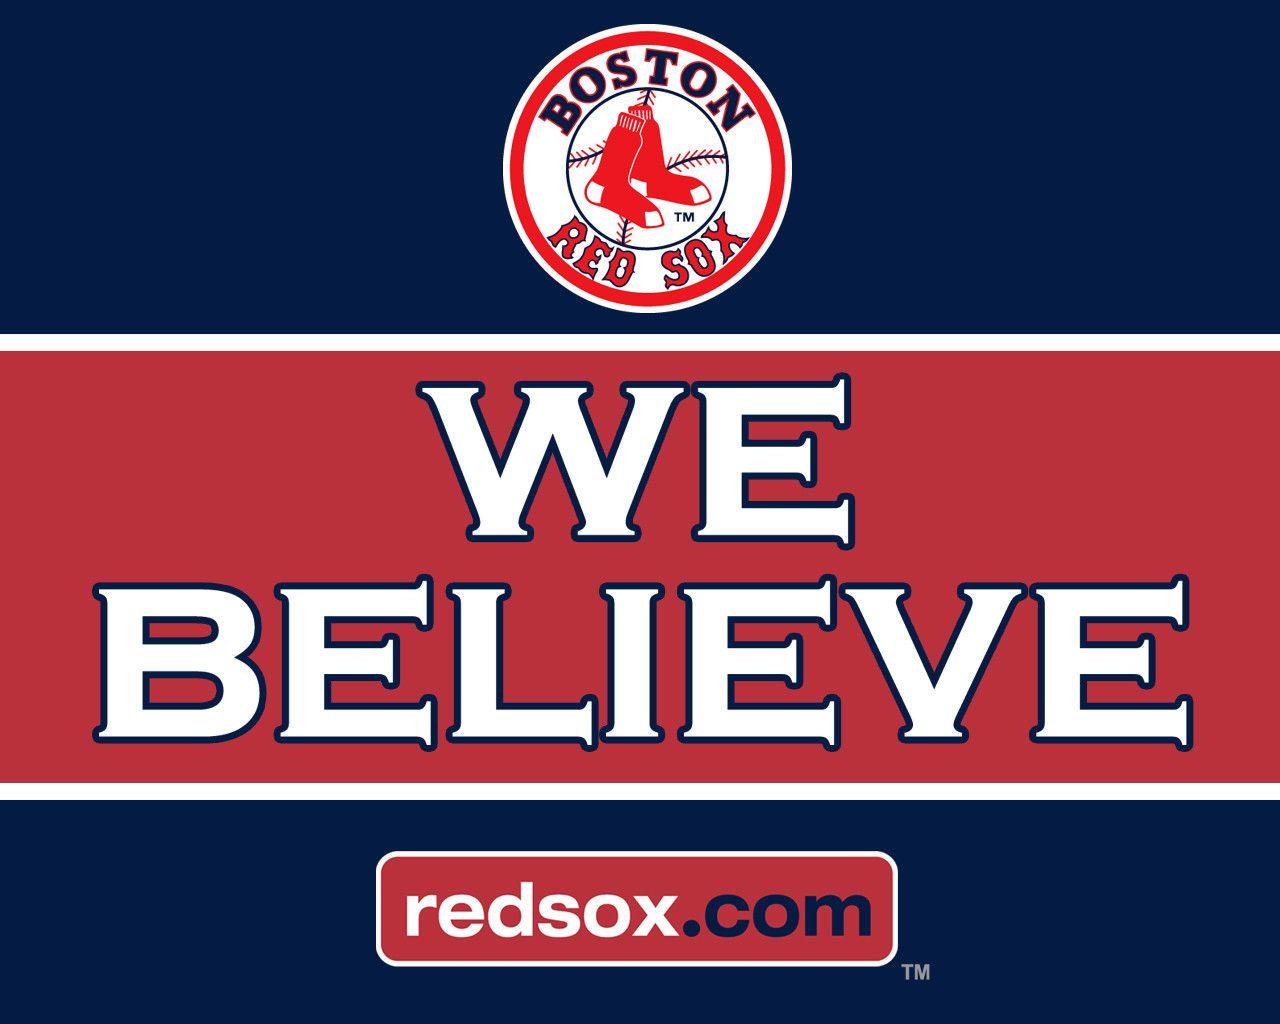 Boston Red Sox wallpaper. Boston Red Sox background